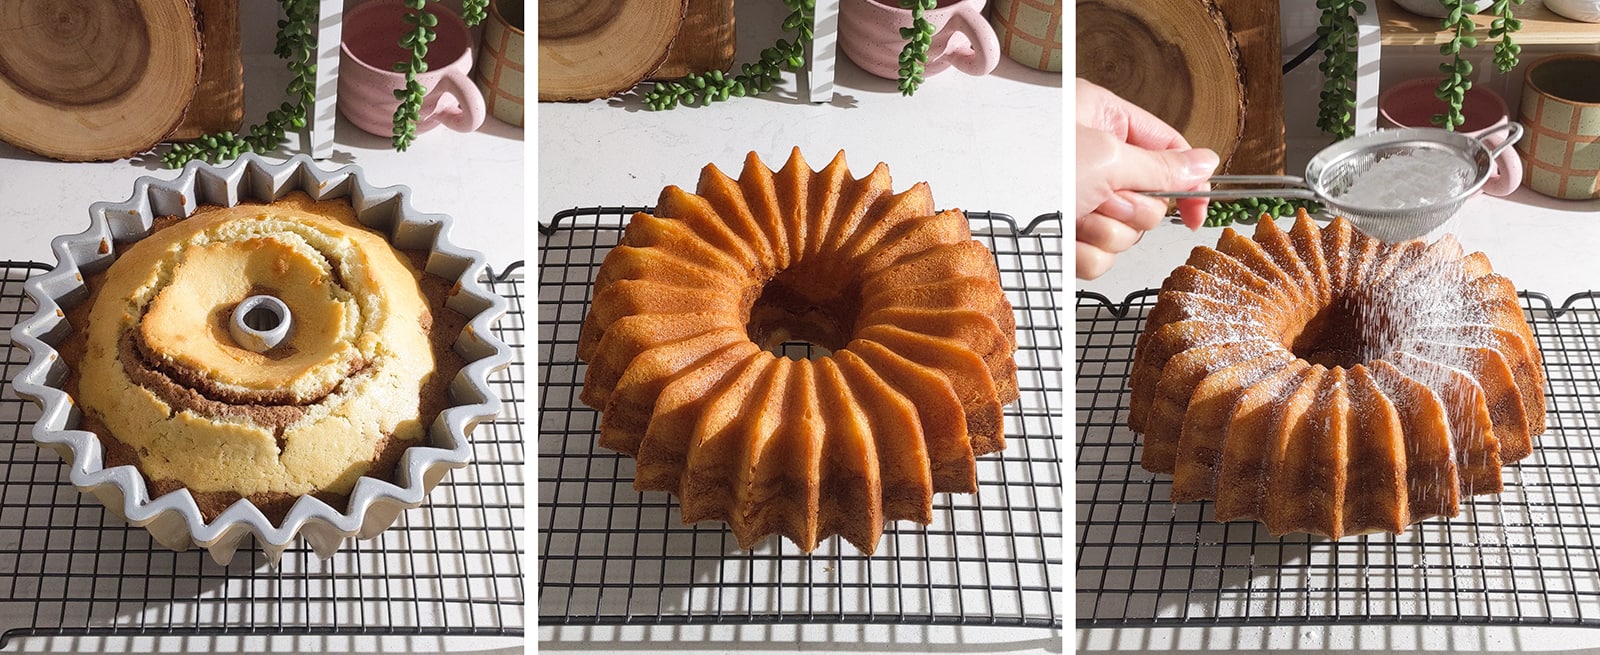 Releasing a bundt cake from the pan and sprinkling with powdered sugar.